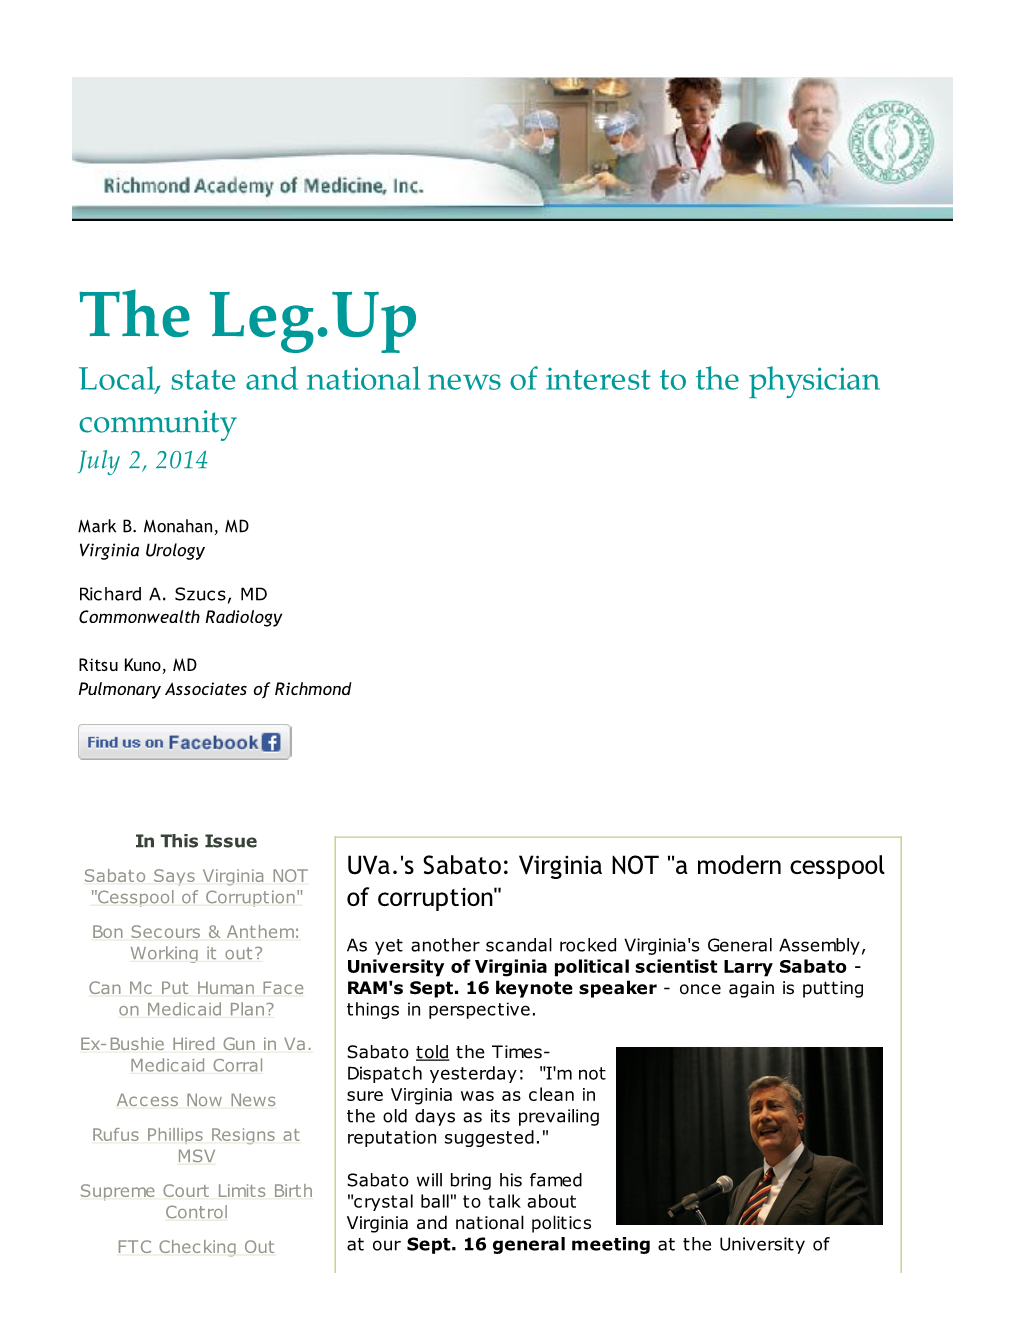 The Leg.Up Local, State and National News of Interest to the Physician Community July 2, 2014